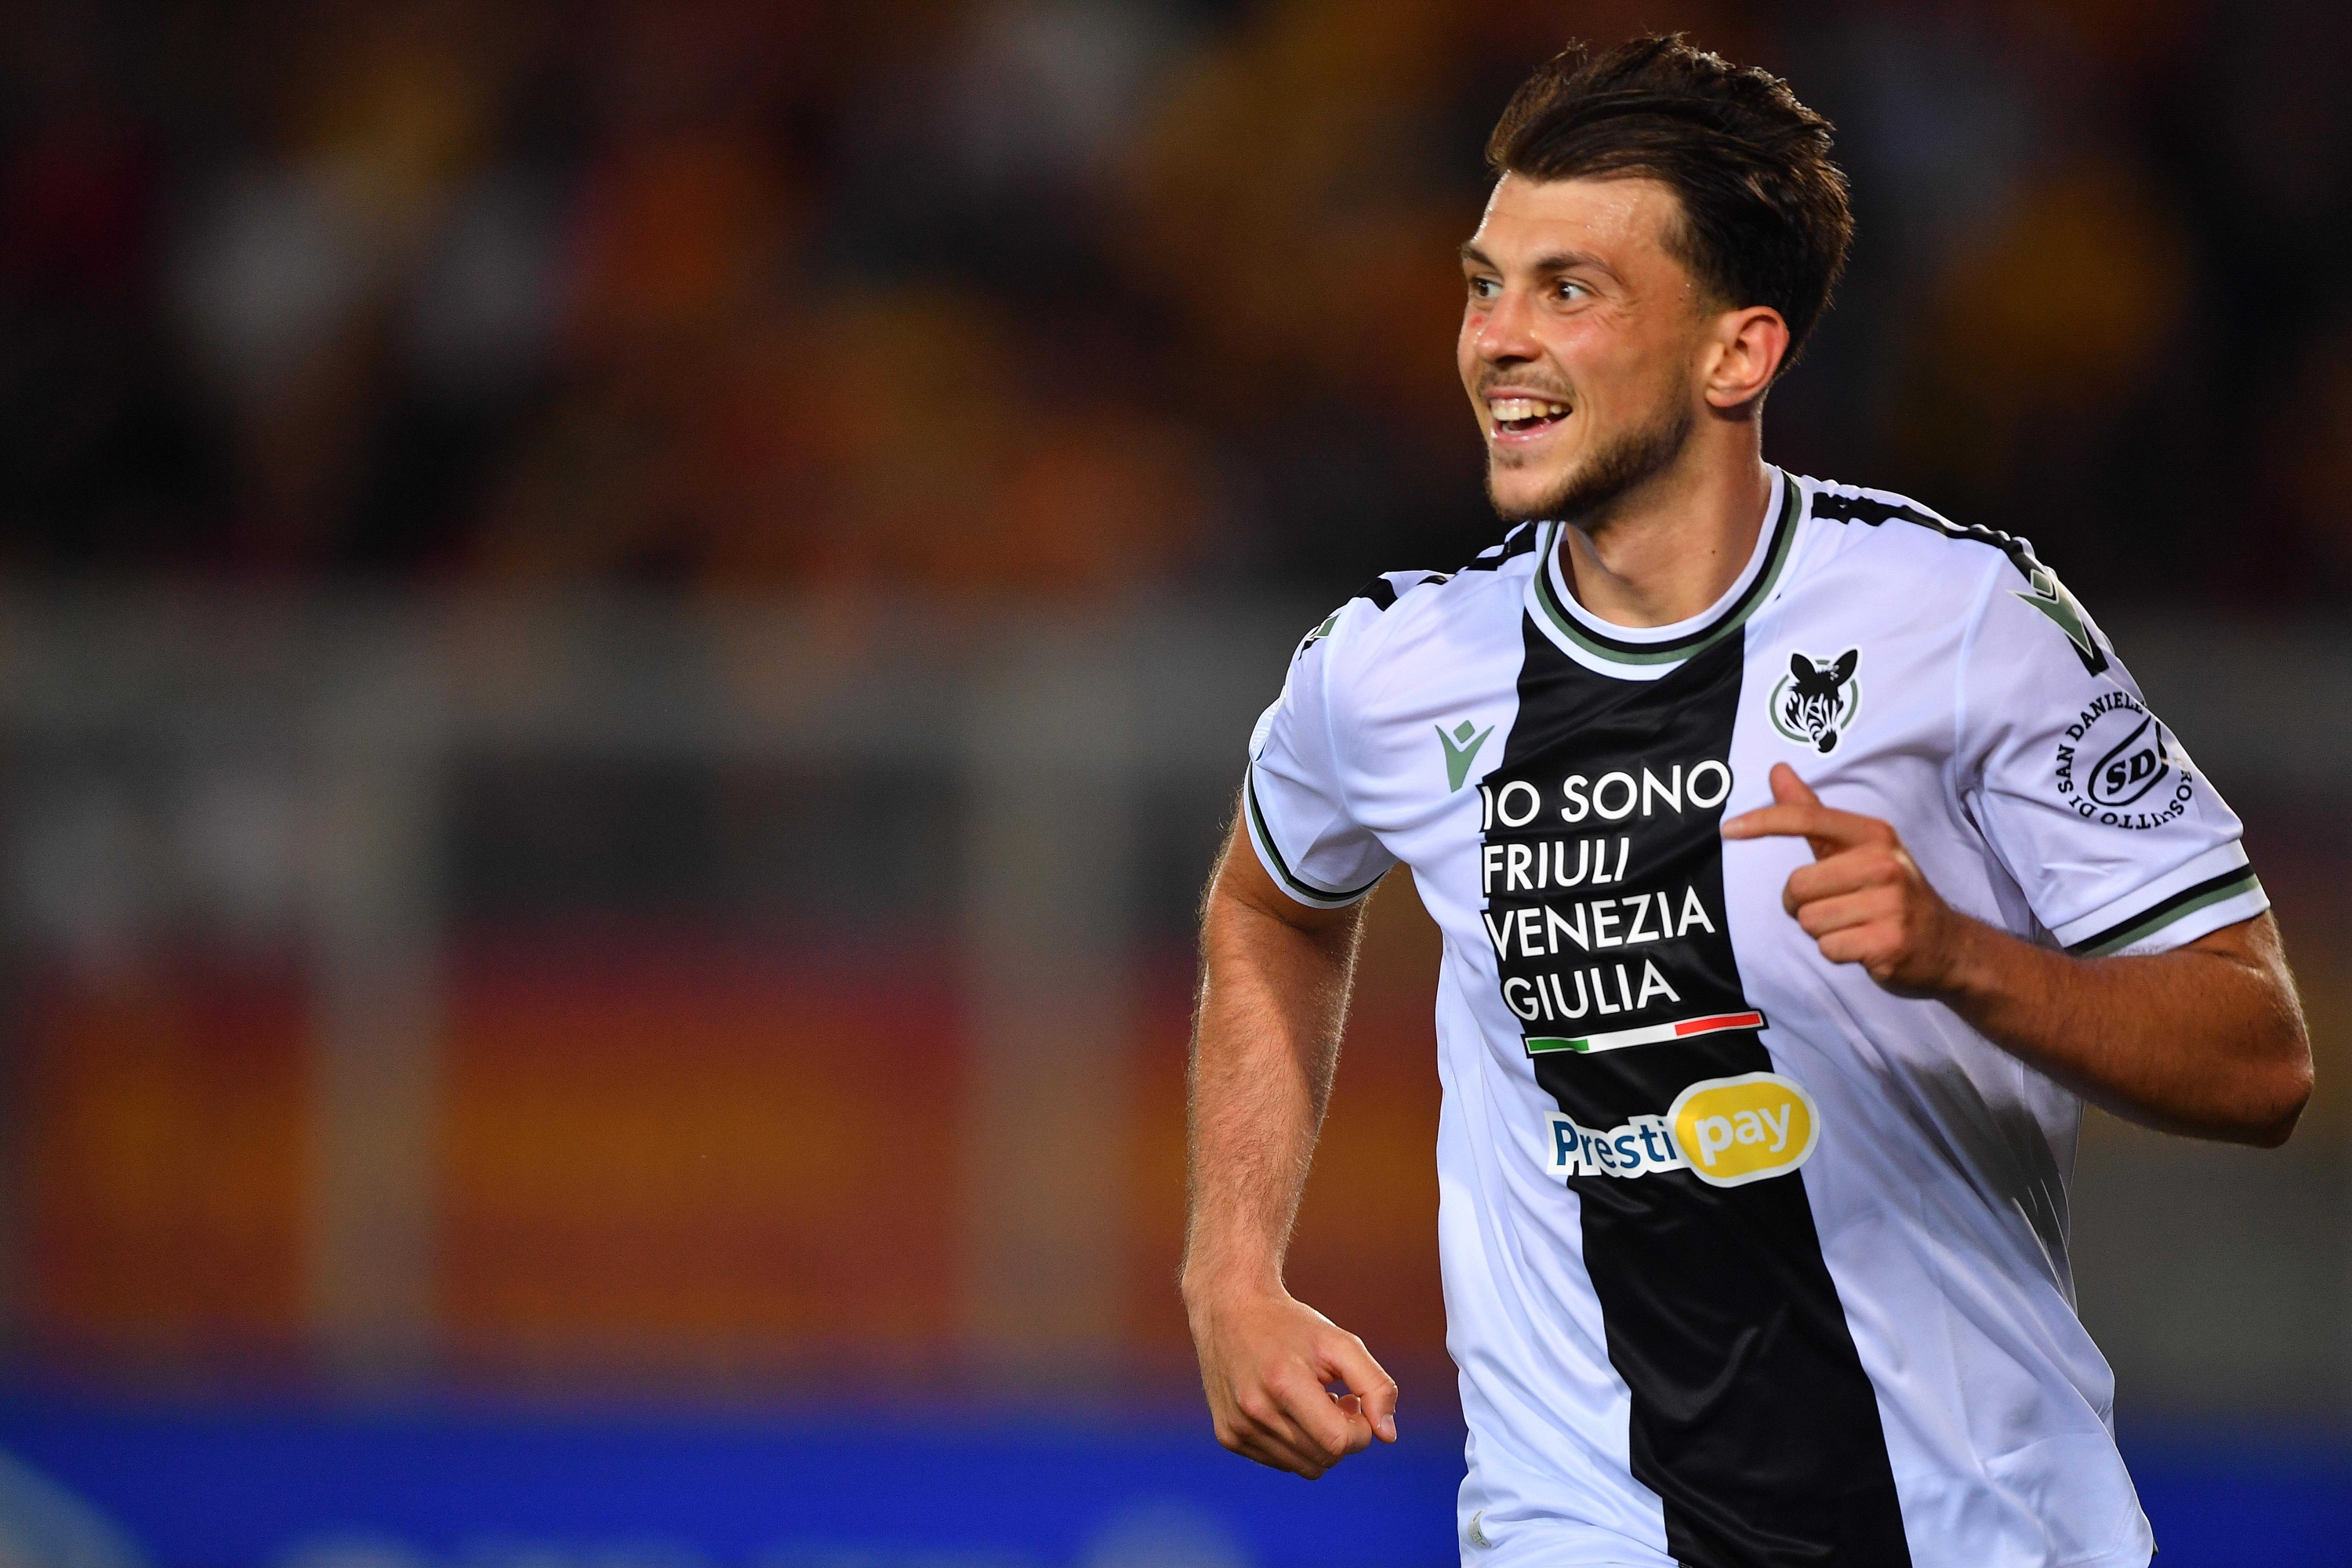 Udinese's midfielder Lazar Samardzic (24 Udinese Calcio) celebrates after scoring the team's second goal during the Serie A TIM soccer match between US Lecce and Udinese Calcio 1896 at the Via del Mare Stadium in Lecce, Italy, Monday, May 13, 2024. (Credit Image: © Giovanni Evangelista/LaPresse)